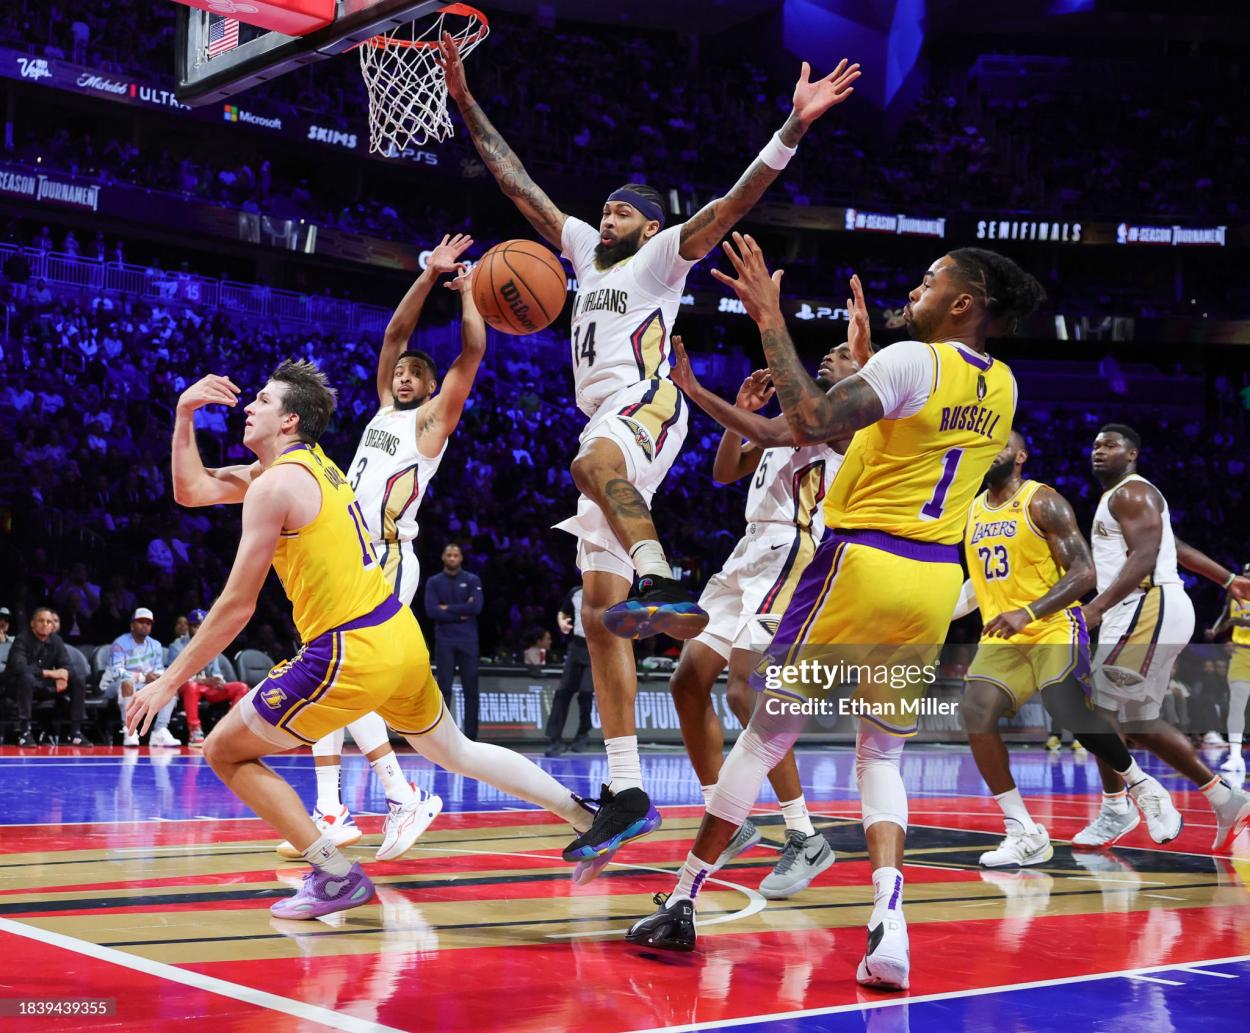 Austin Reaves #15 of the Los Angeles Lakers tries to pass the ball behind him to D'Angelo Russell #1 as Brandon Ingram #14 of the New Orleans Pelicans defends in the first half of the West semifinal game of the inaugural NBA In-Season Tournament at T-Mobile Arena on December 07, 2023 in Las Vegas, Nevada. The Lakers defeated the Pelicans 133-89. NOTE TO USER: User expressly acknowledges and agrees that, by downloading and or using this photograph, User is consenting to the terms and conditions of the Getty Images License Agreement. (Photo by Ethan Miller/Getty Images)